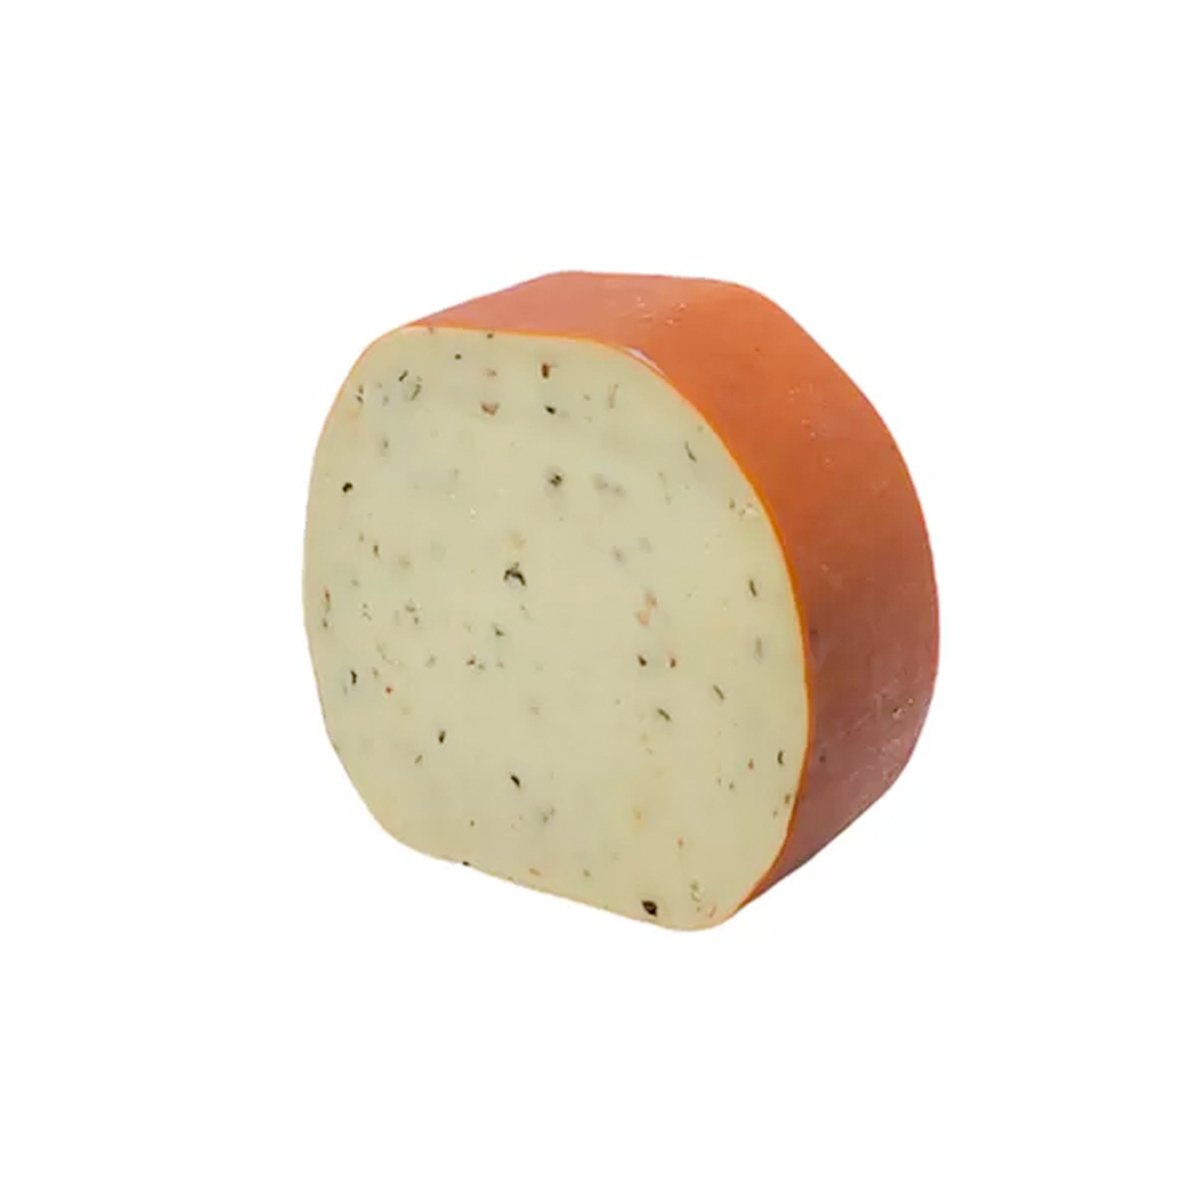 Dutch Smoked Cheese With Pepper 250G Approx Weight